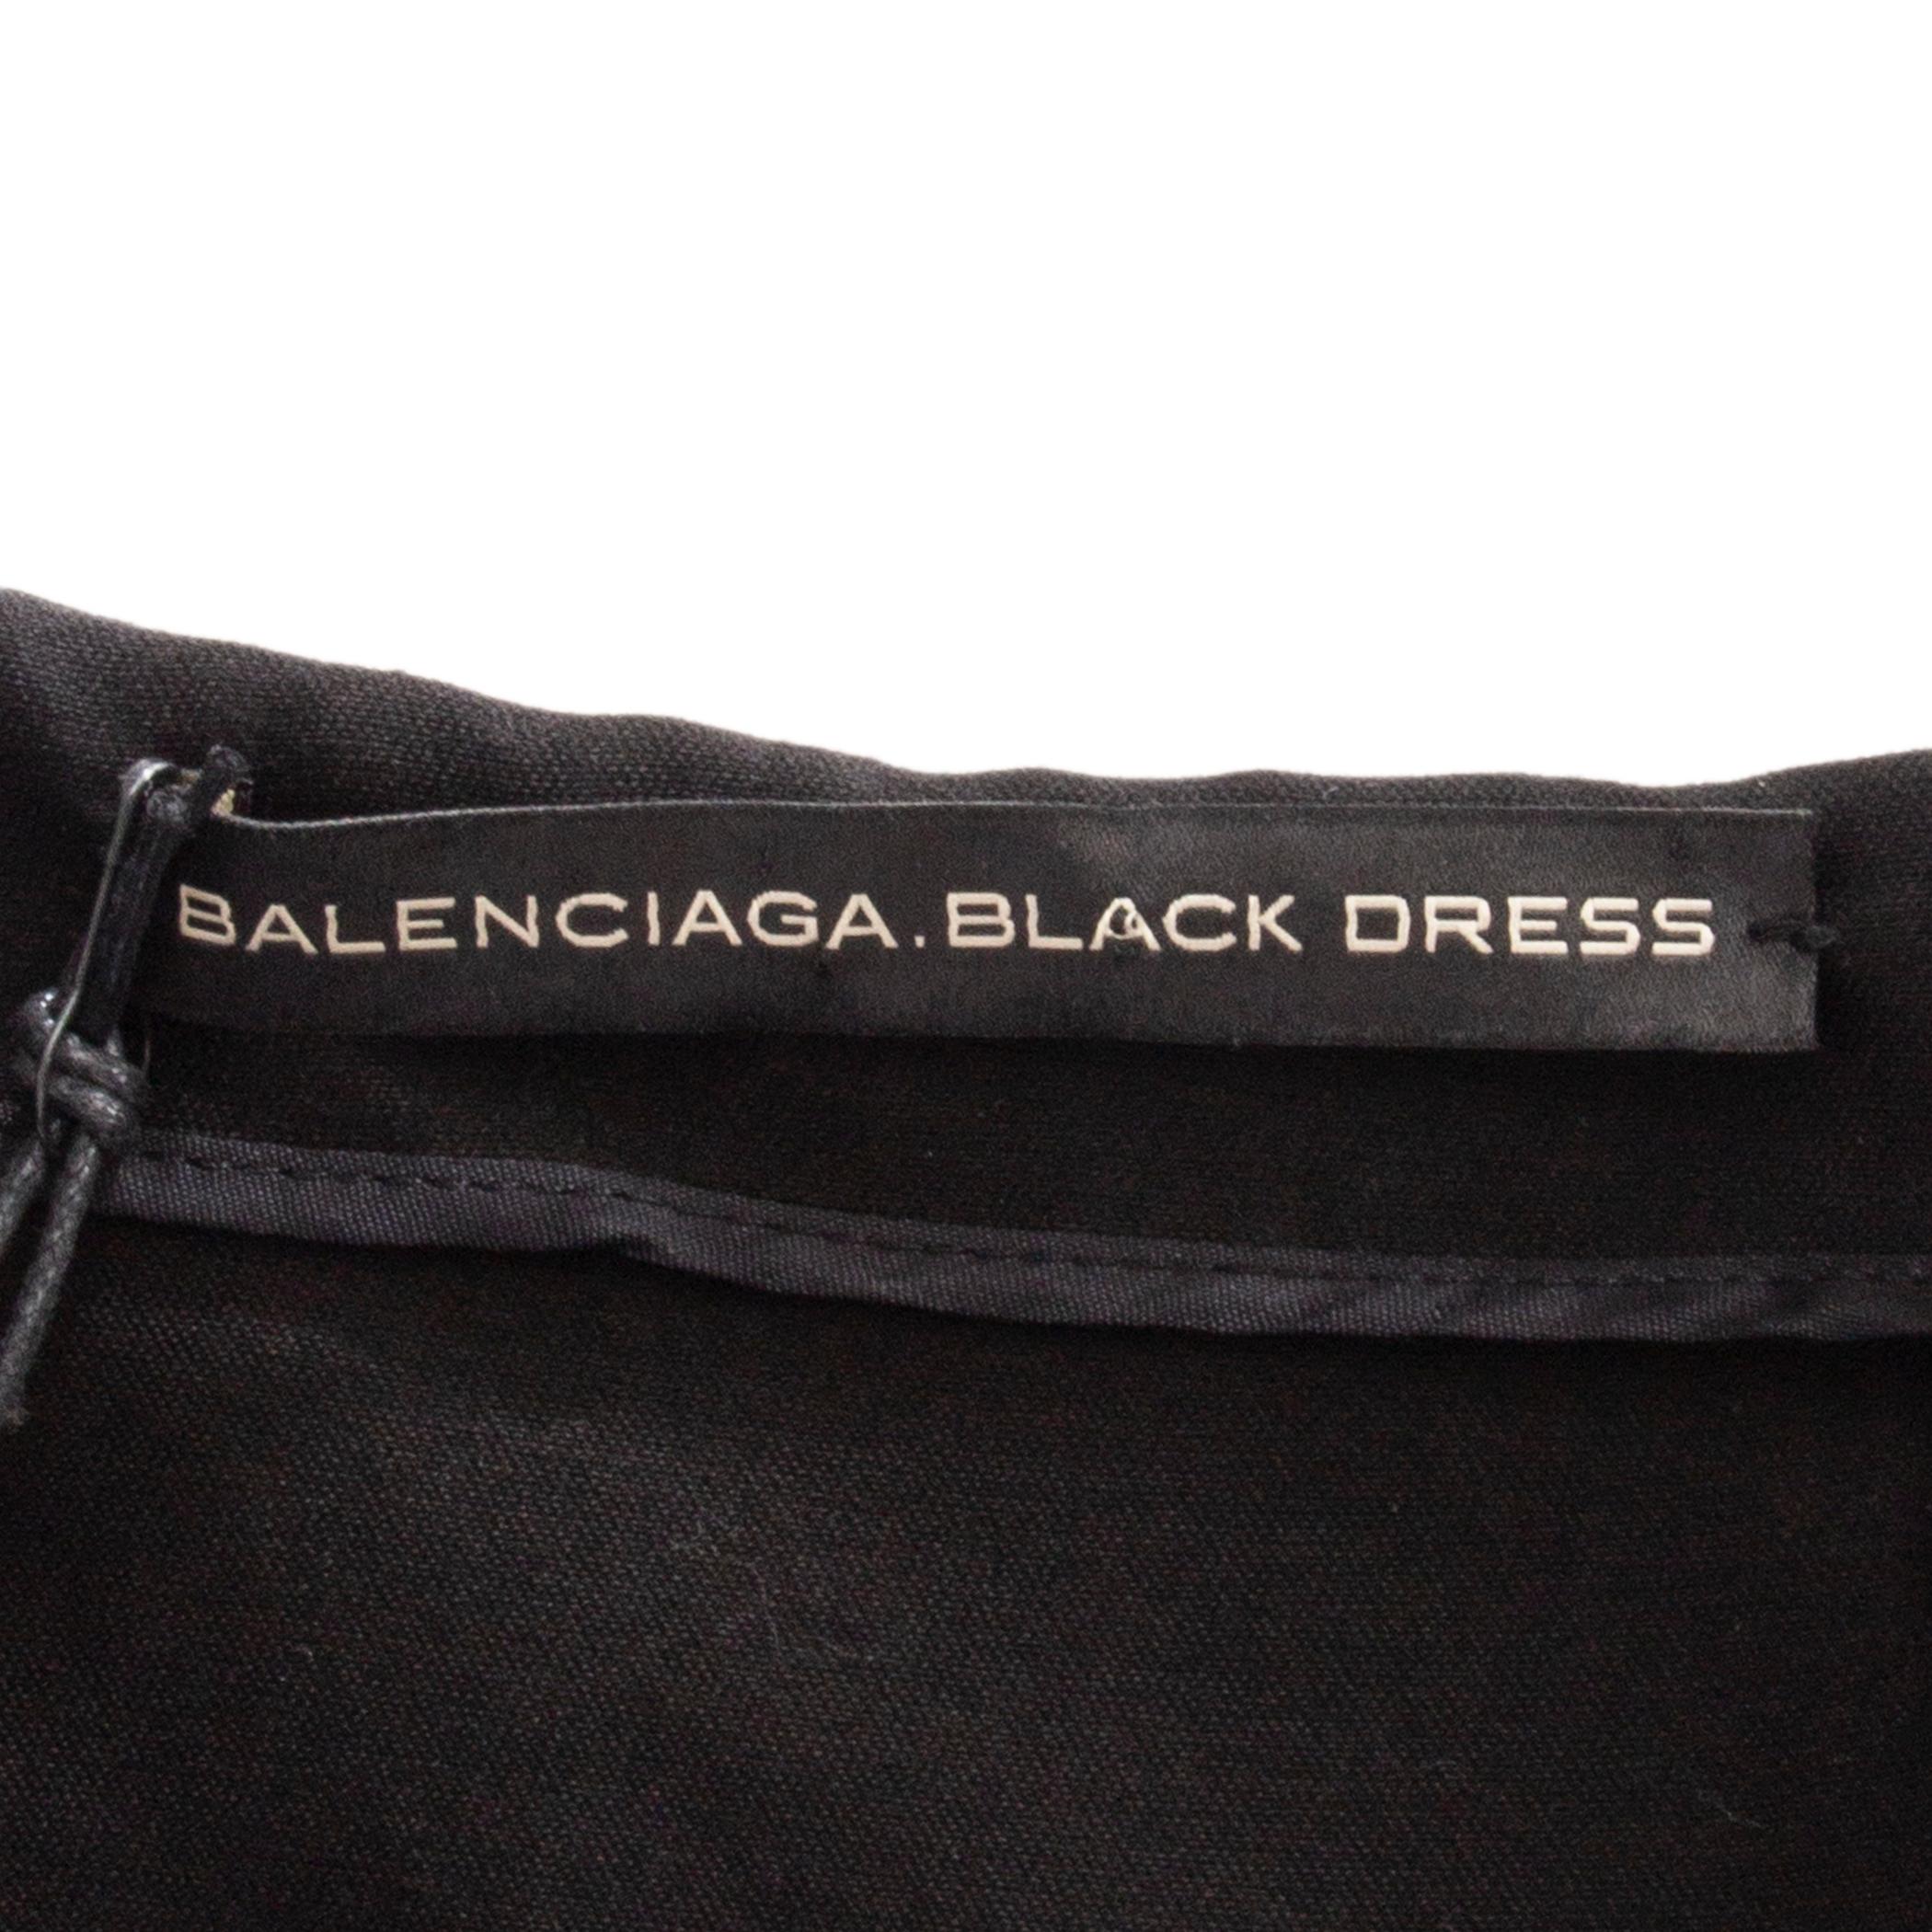 BALENCIAGA black cotton 3/4 SLEEVE SHEATH Dress 40 M In Excellent Condition For Sale In Zürich, CH